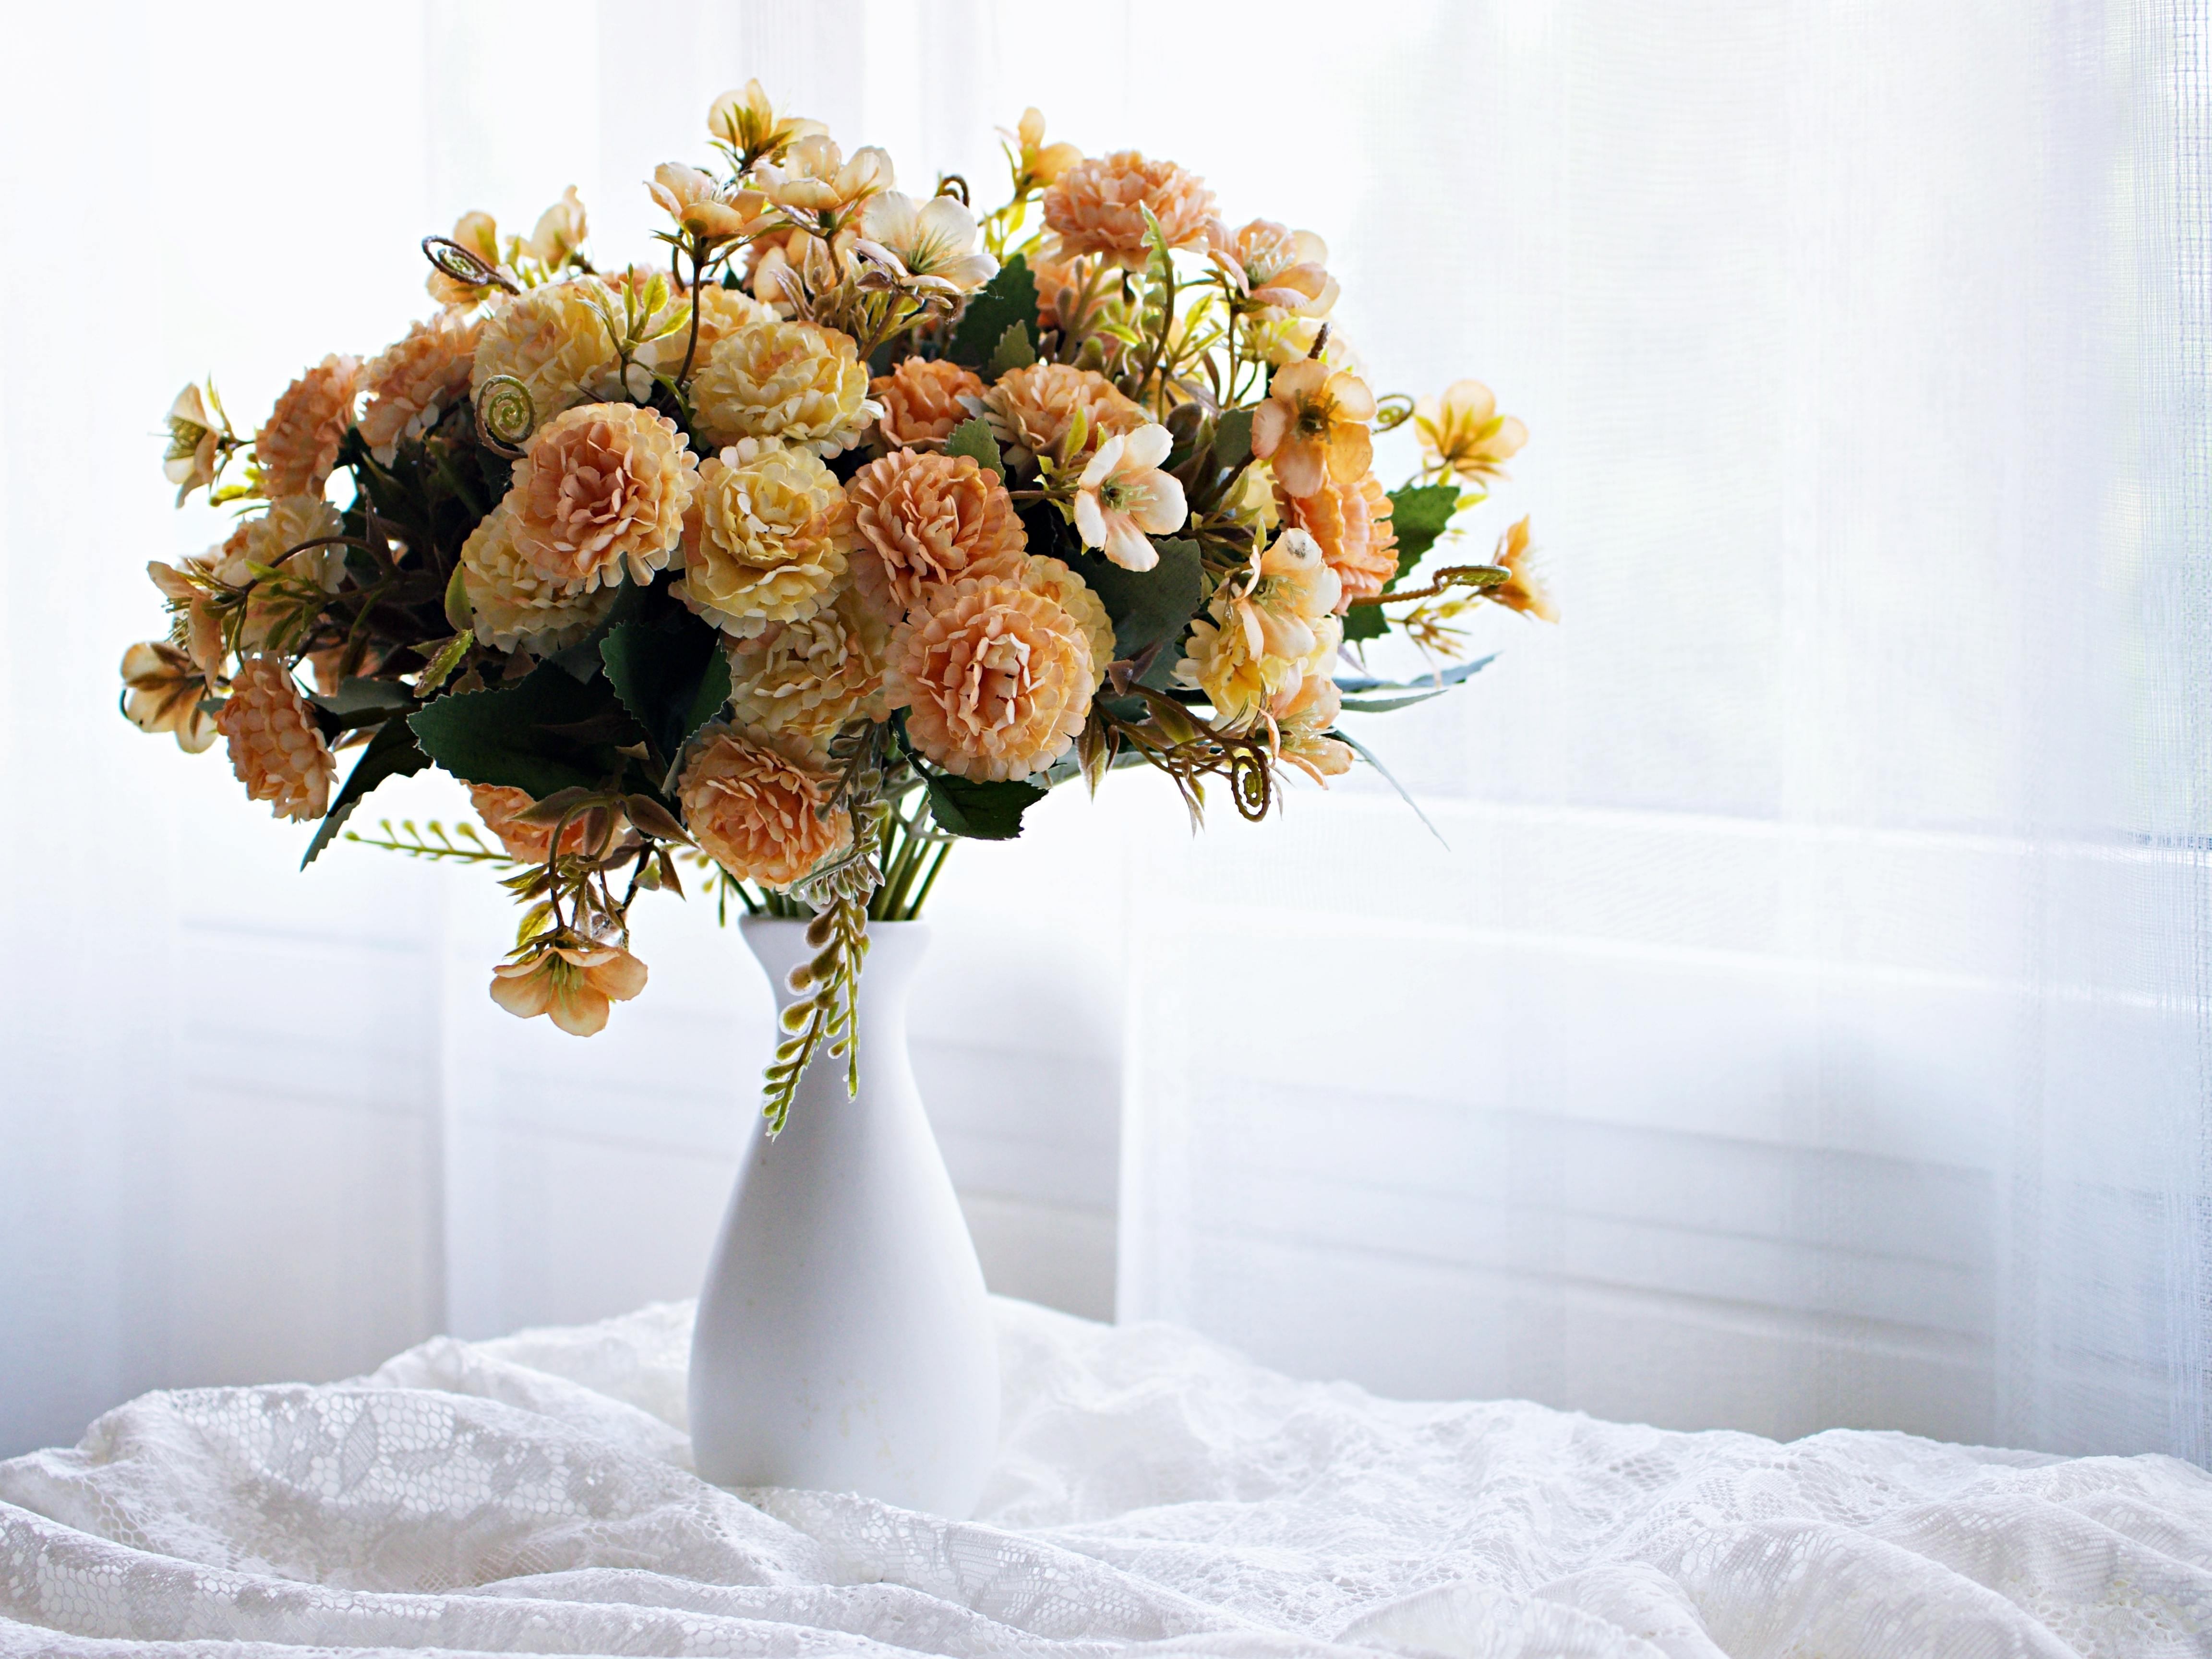 A bouquet in a beautiful vase makes a thoughtful self-care gift for a friend.